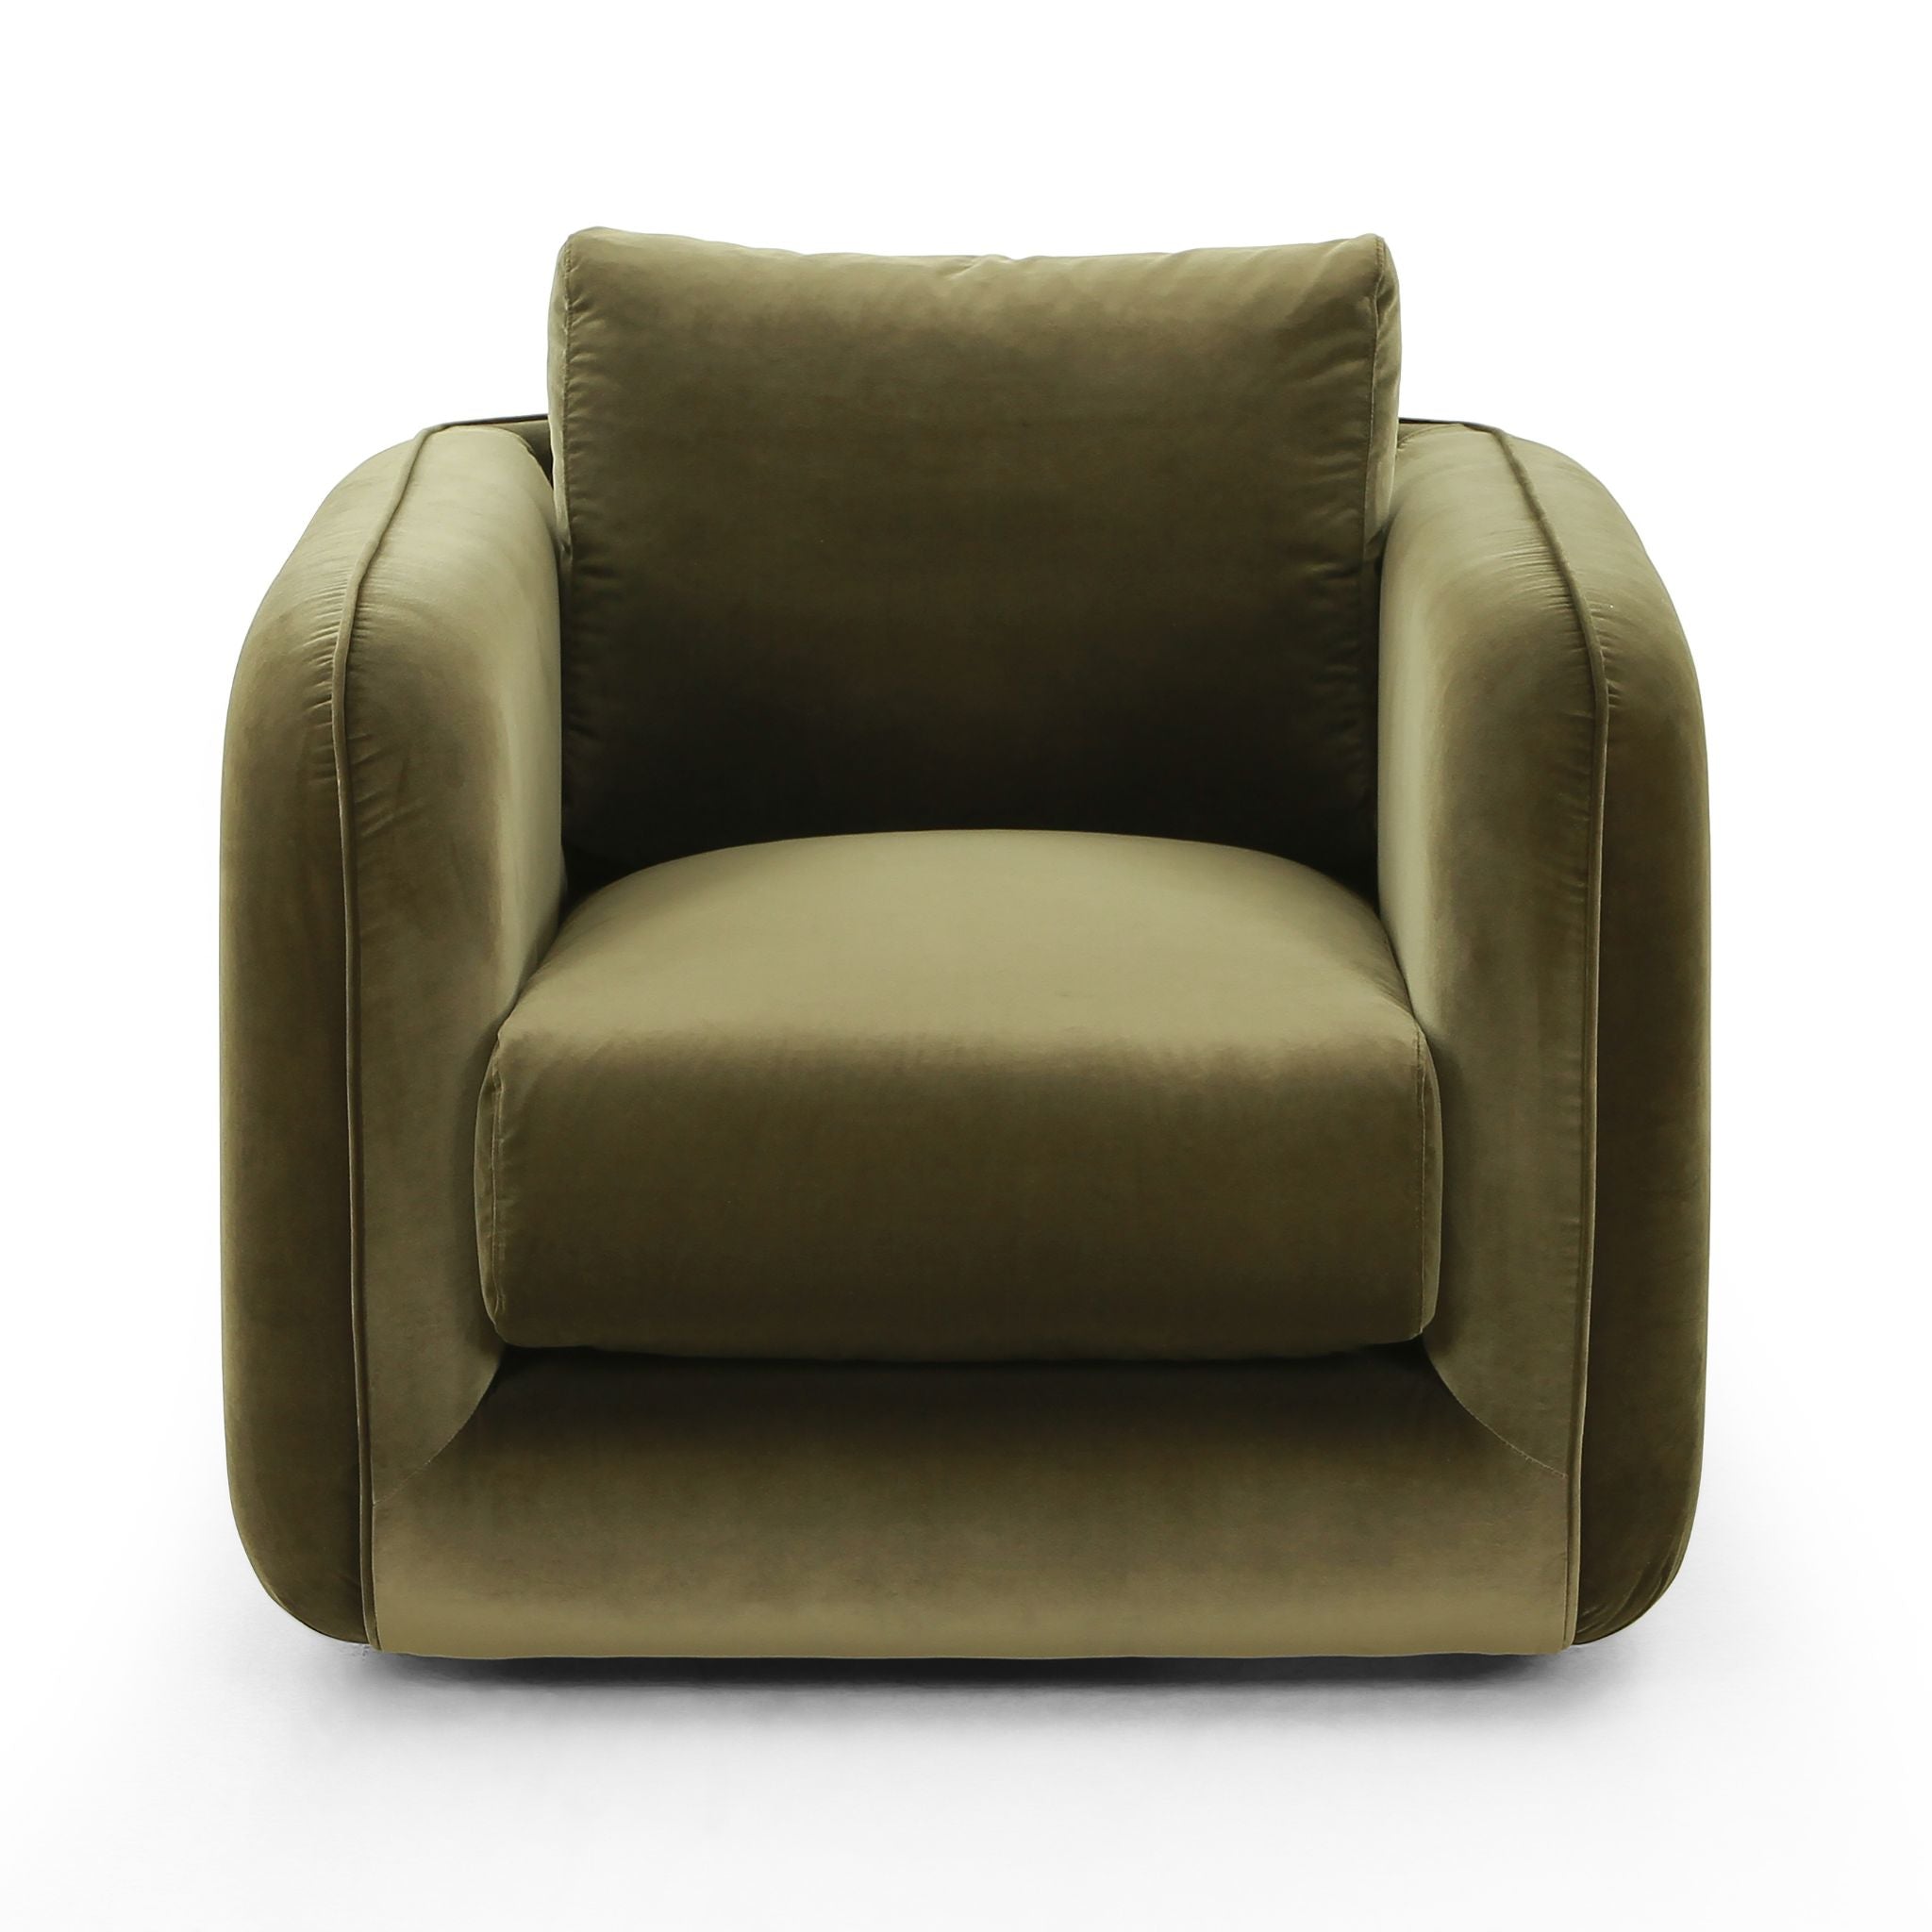 Simply Elevated - Experience the perfect blend of modern design and luxurious comfort with our stunningly crafted Malakai Swivel Chair. This exceptional piece of furniture combines a sleek and linear structure with sink-in softness, creating the ultimate seating experience in any contemporary living space.